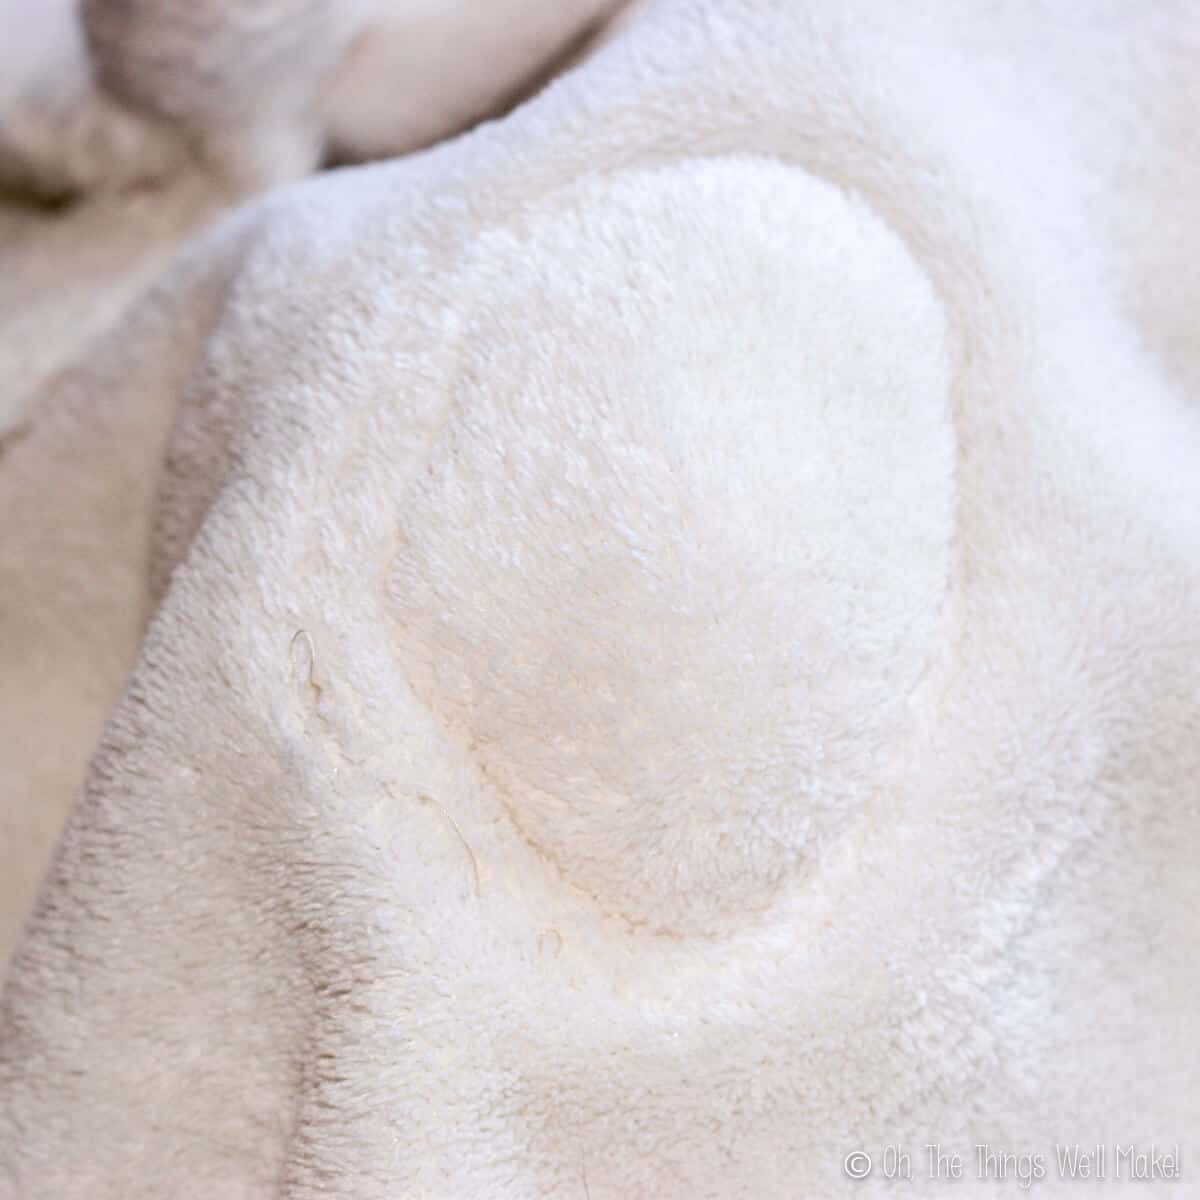 Close up of where the head has been sewn on the white blanket.